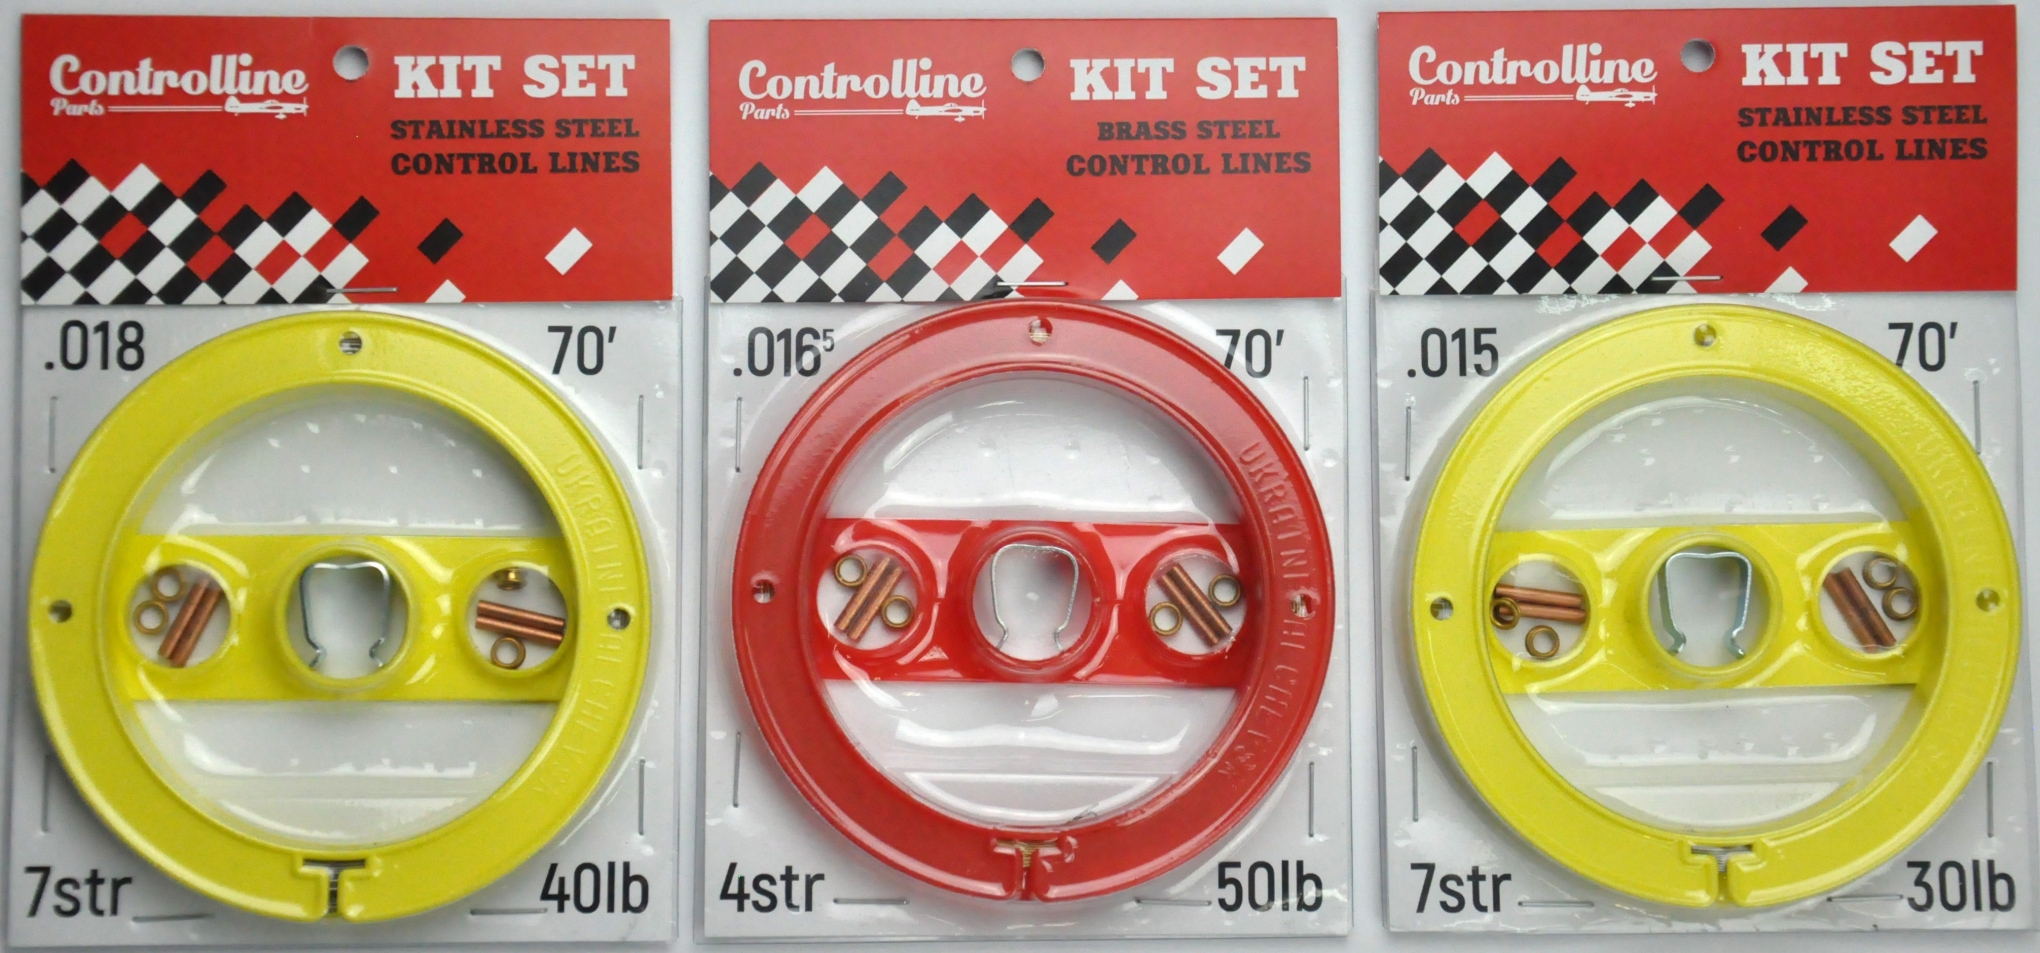 KIT SET CONTROL LINES .015 IN 70 FEET 7 STRAND 30 LB